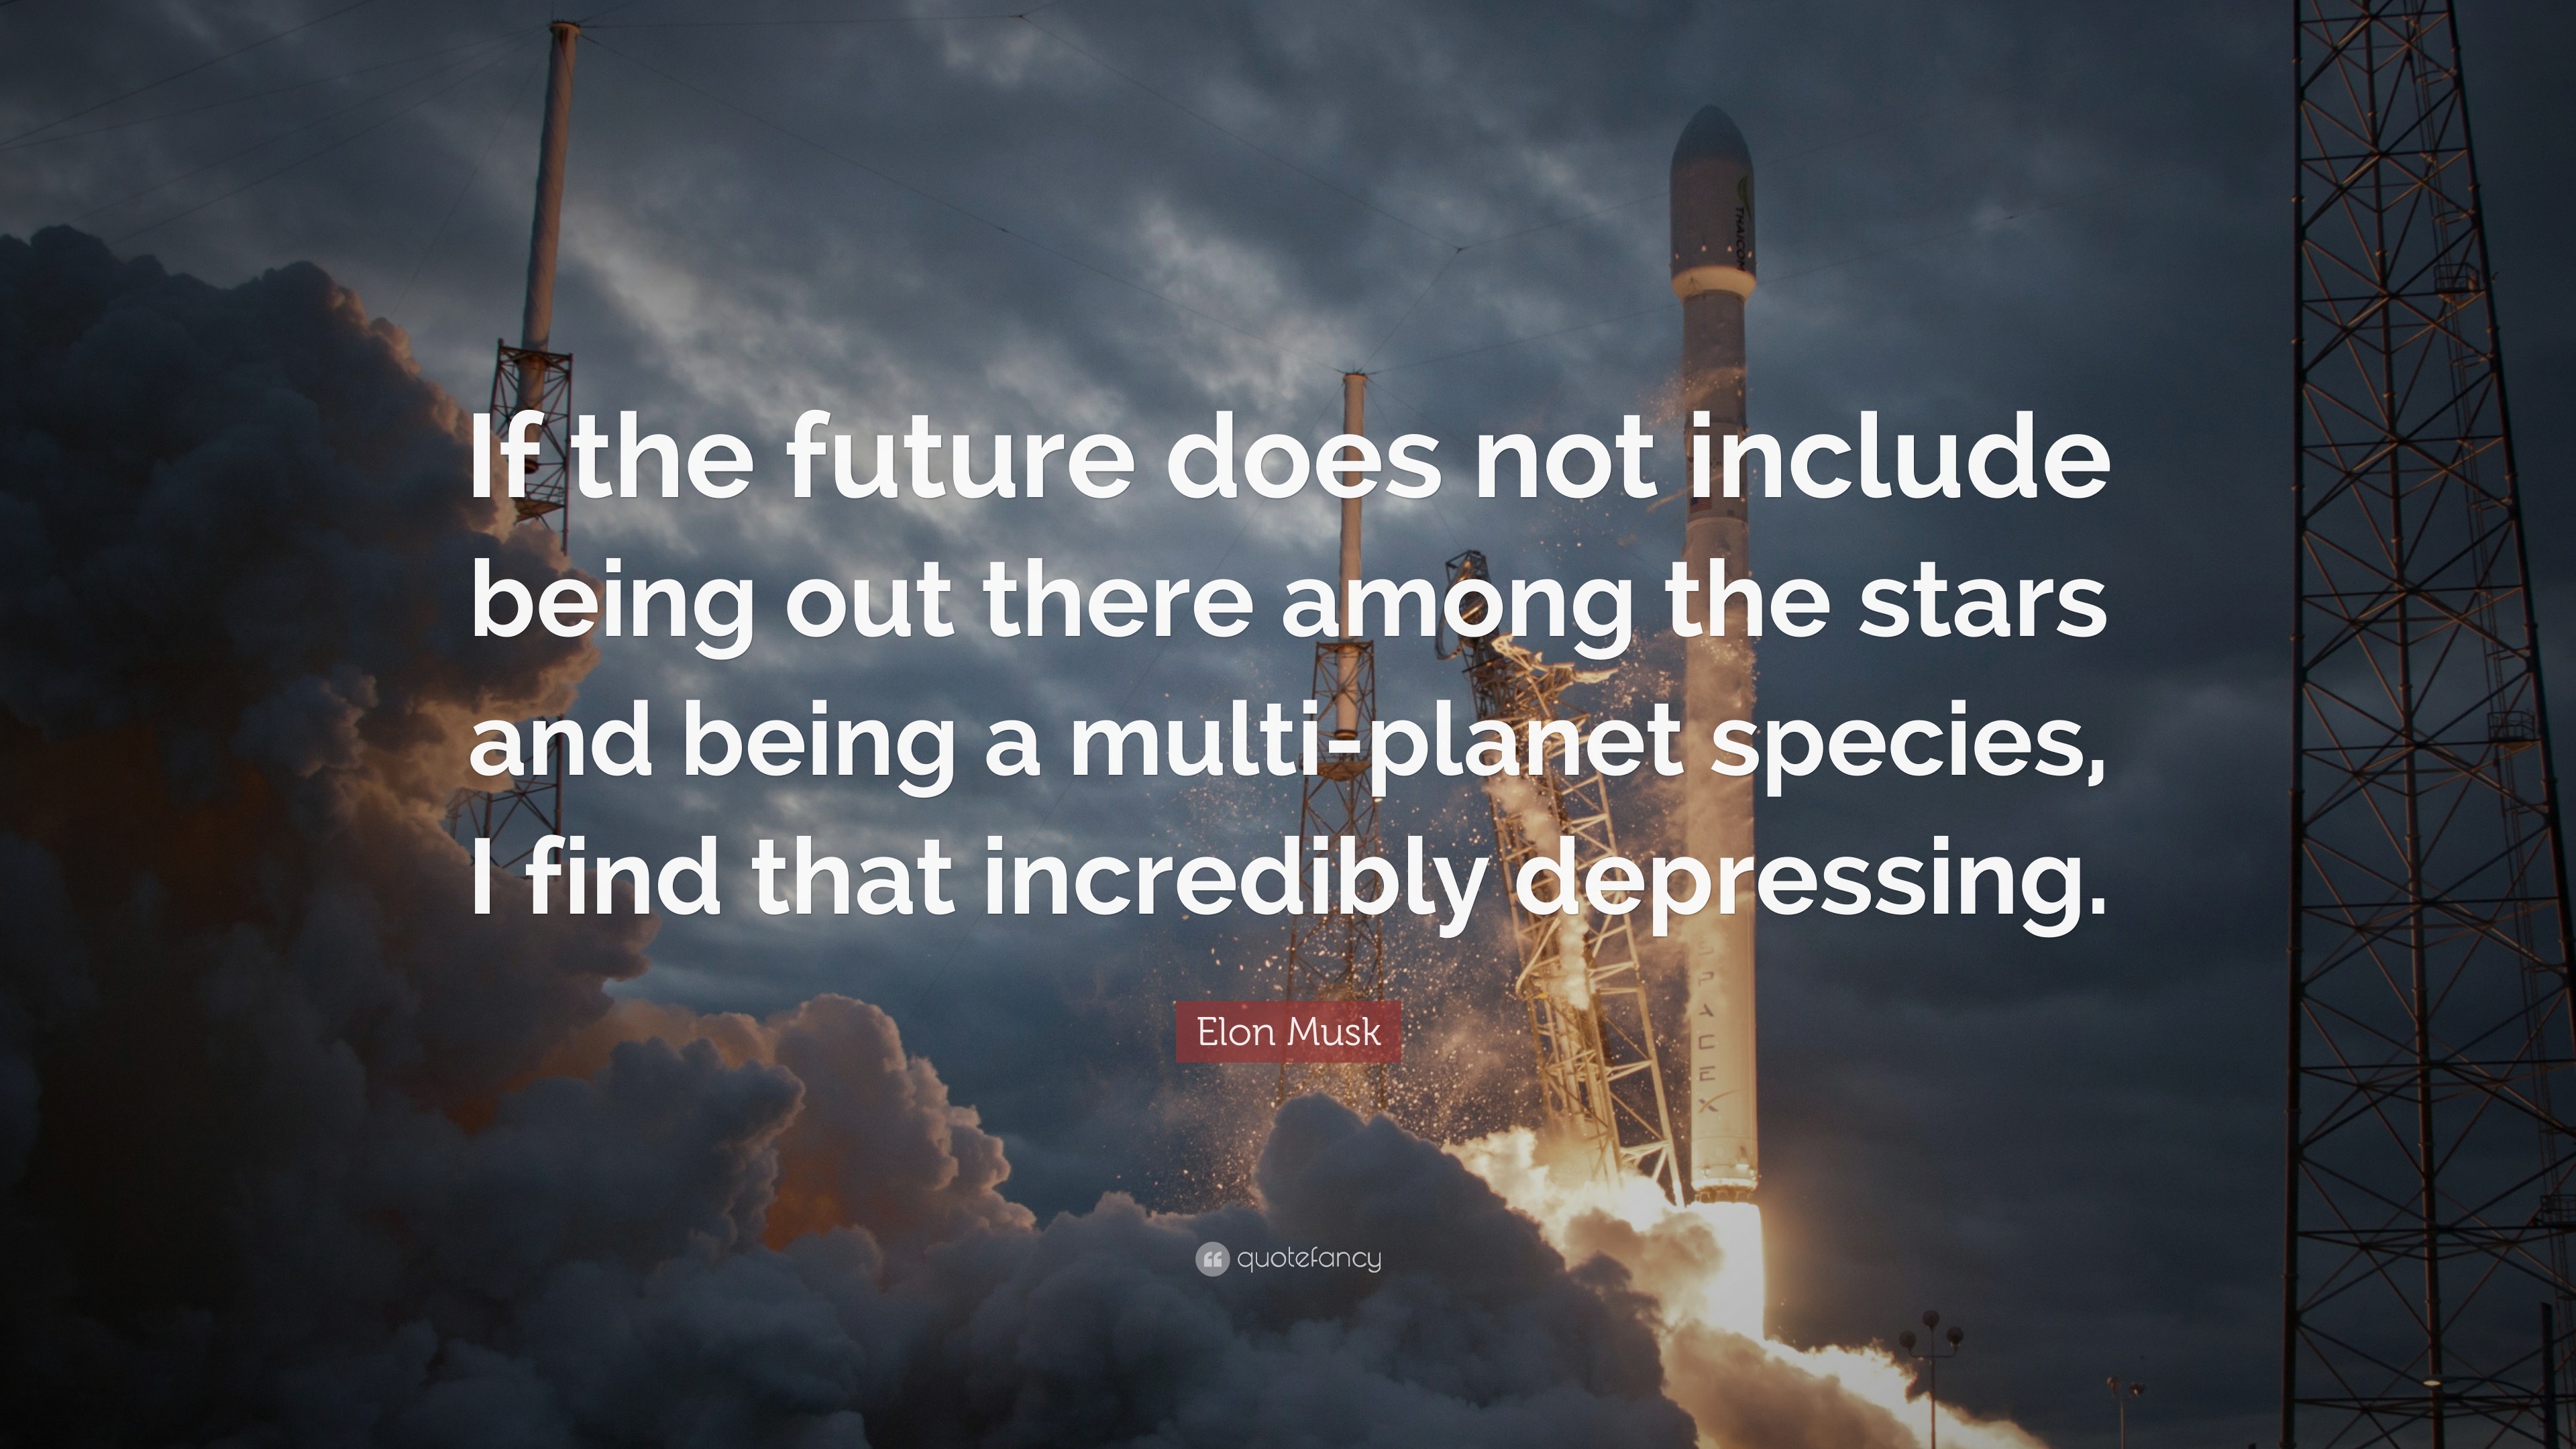 Elon Musk Quote If The Future Does Not Include Being Out There Images, Photos, Reviews